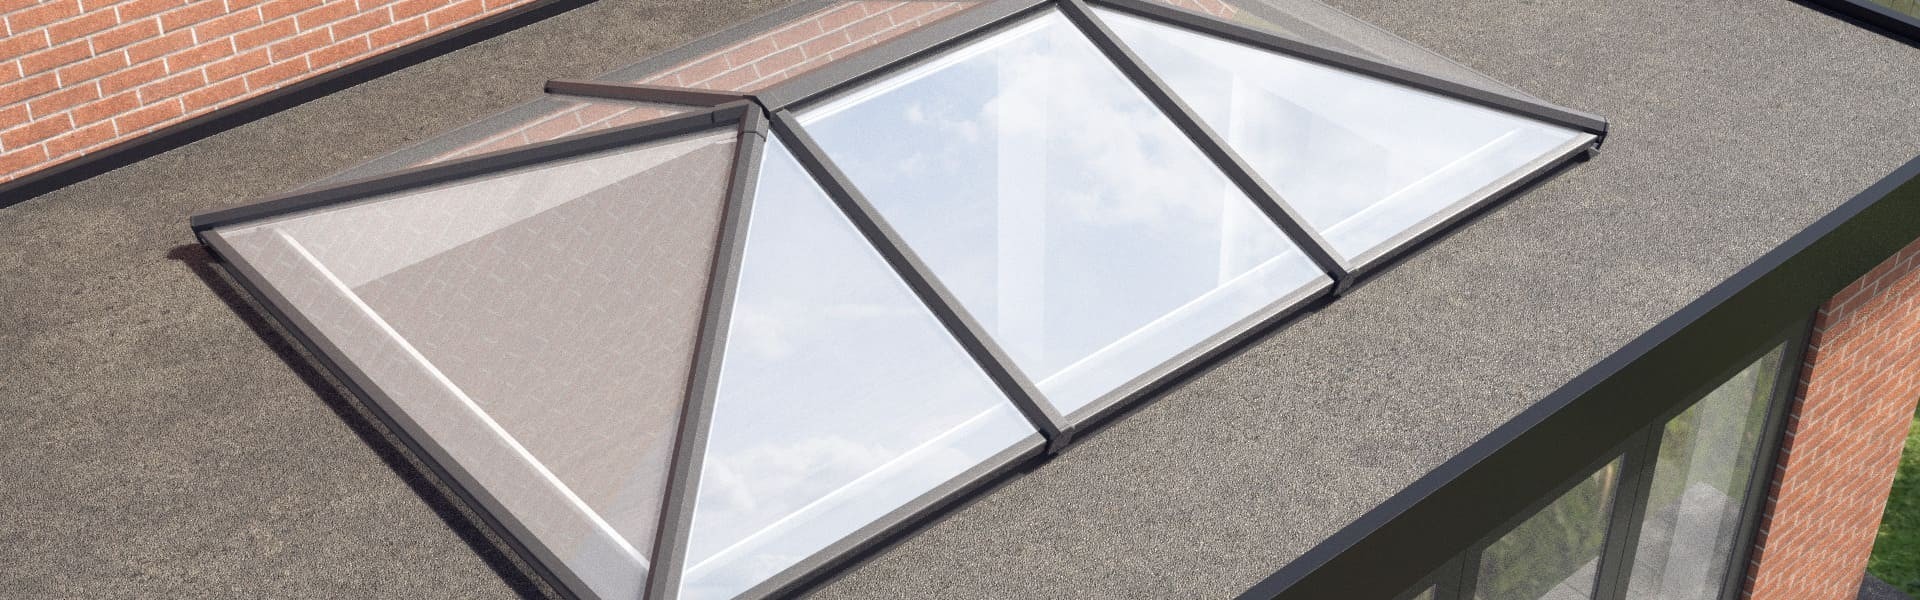 10 Benefits of Skylight Replacement: Illuminating Your Home Improvement Journey